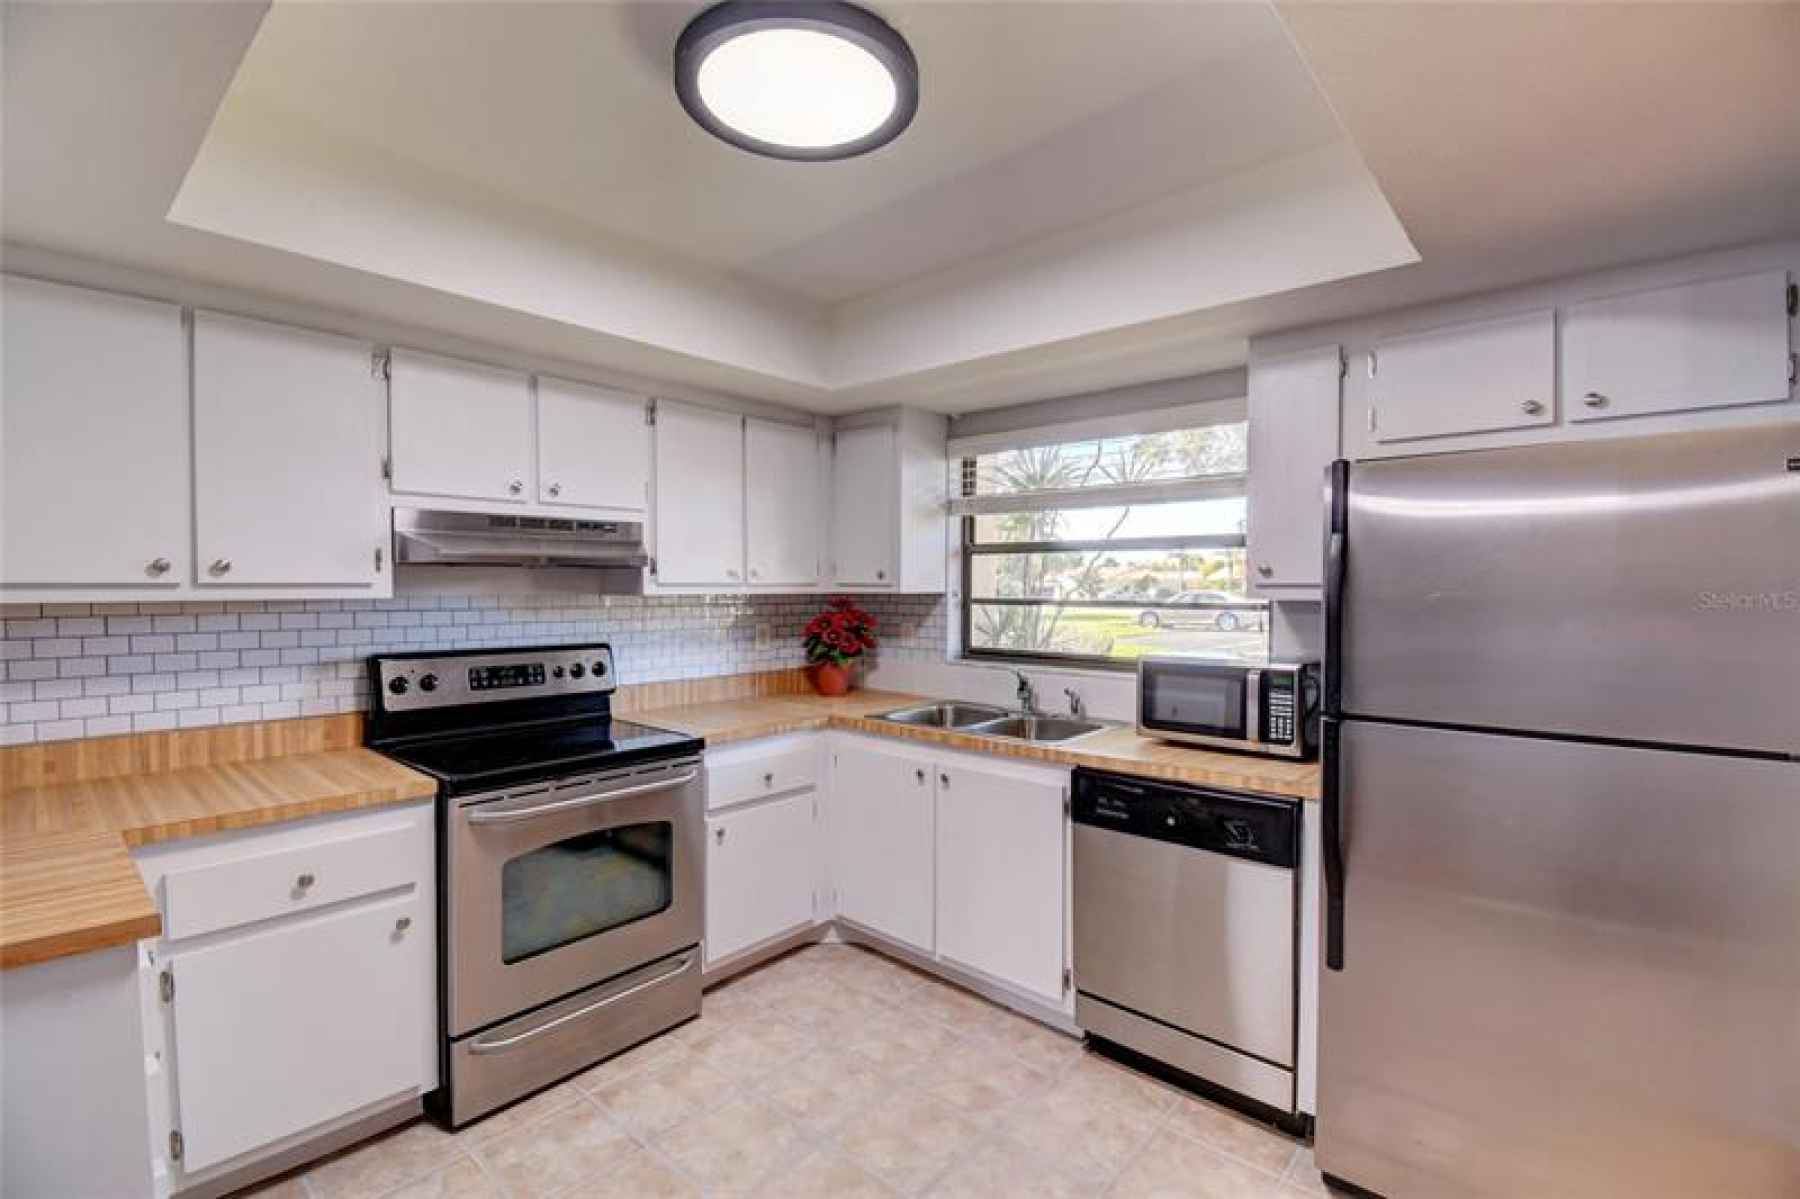 Spacious kitchen with room for dinette.